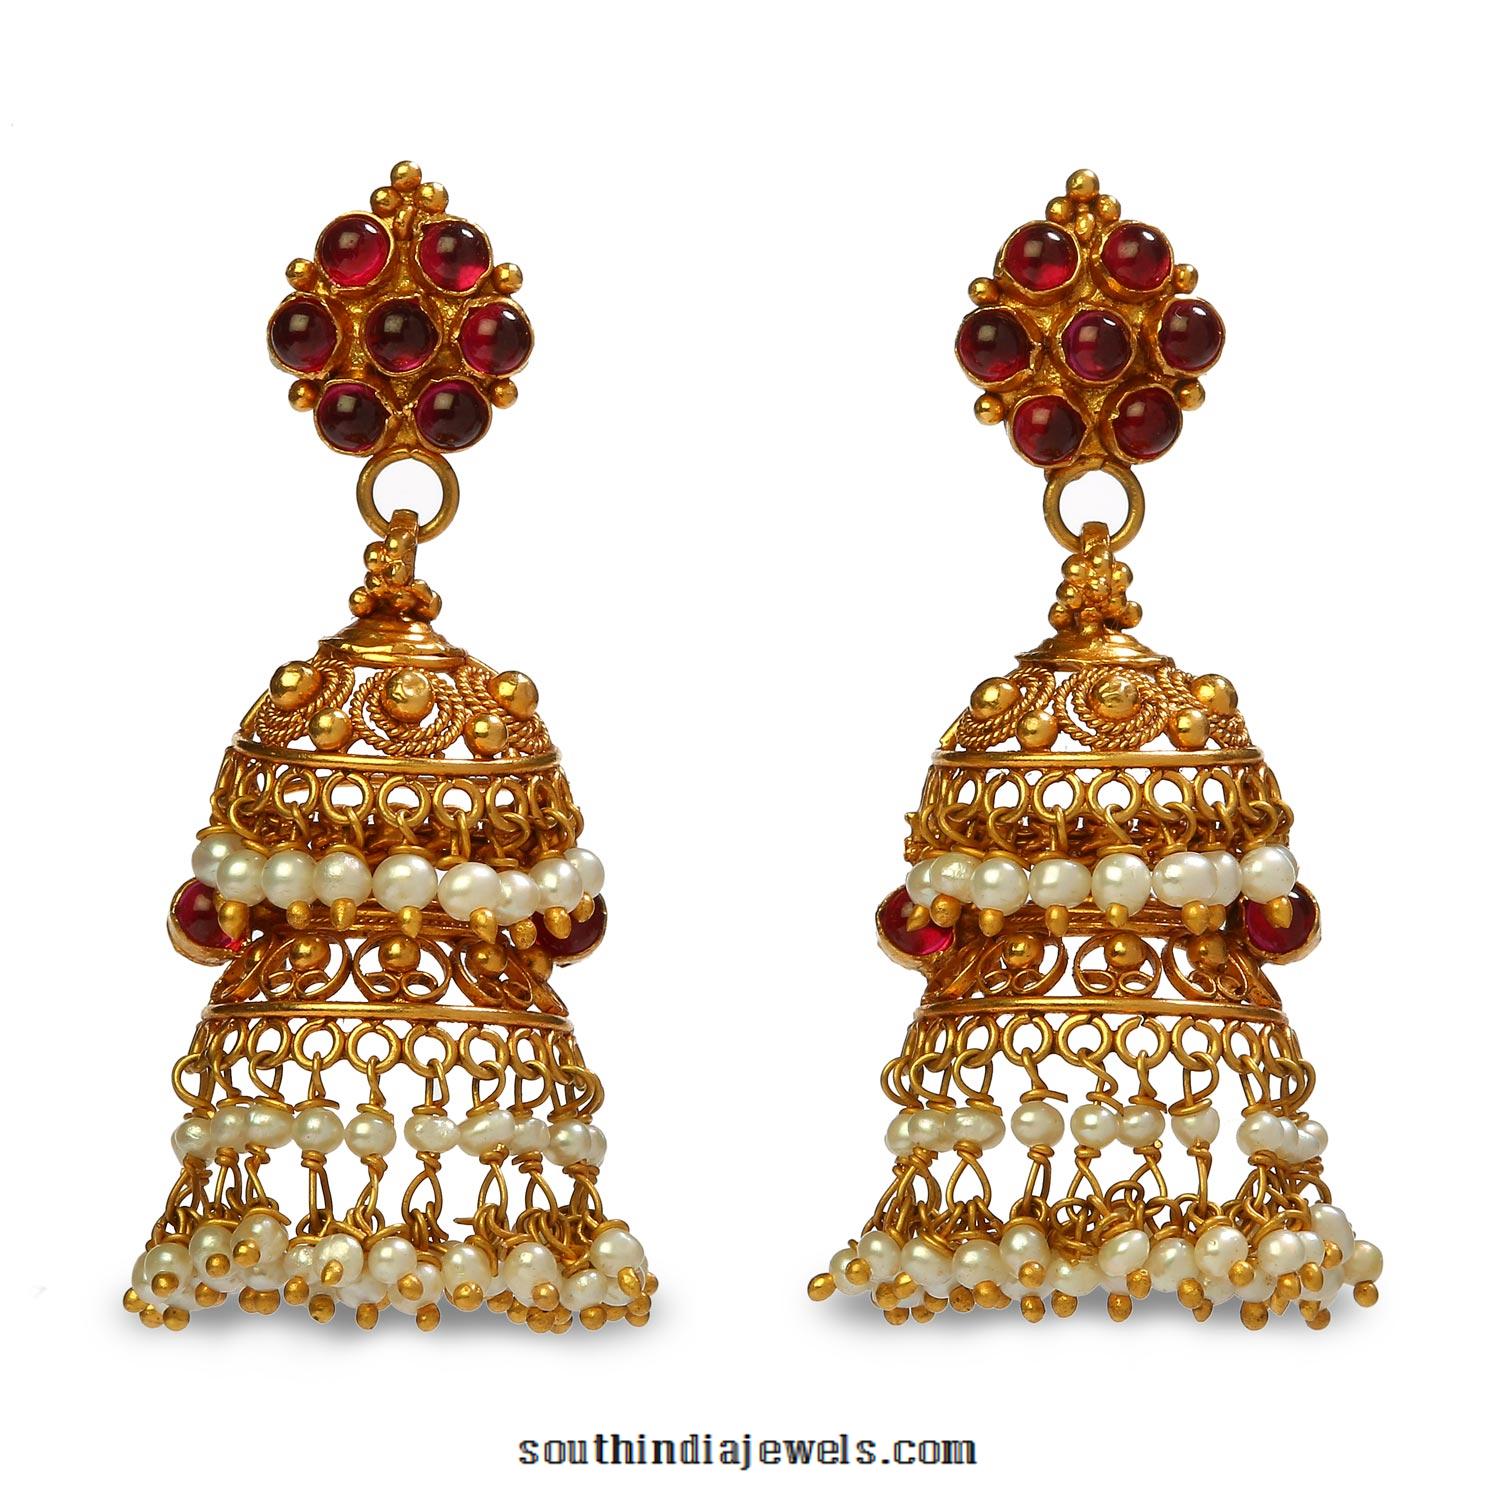 22K Gold Jhumka Earrings from Bhima Jewels - South India Jewels